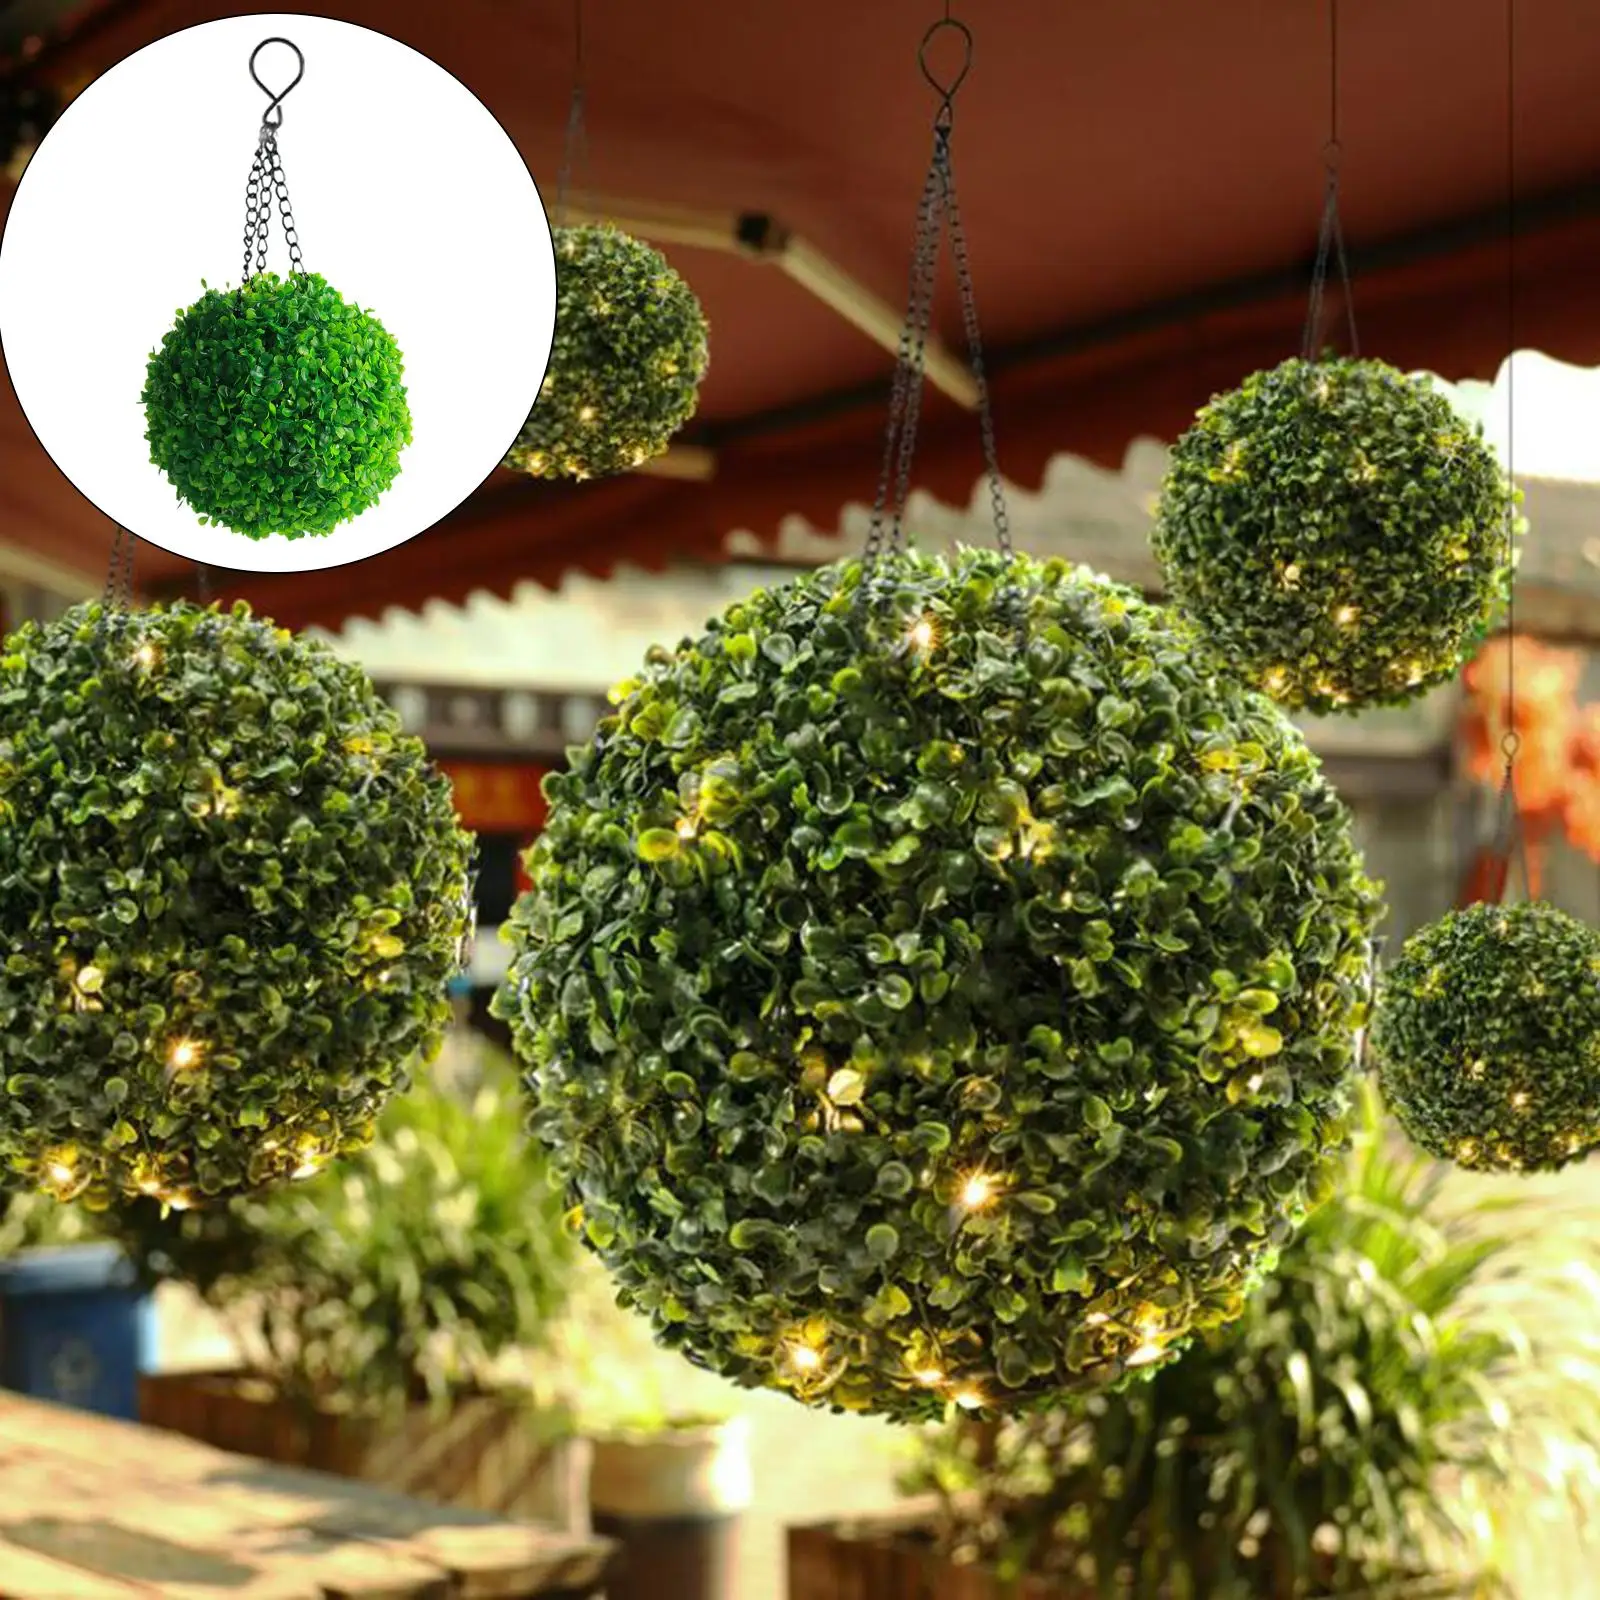 Grass Ball LED Hanging Light Artificial Leaf Topiary Ball Hanging Lantern LED Light for Wedding Porch Balcony Outdoor Ornaments